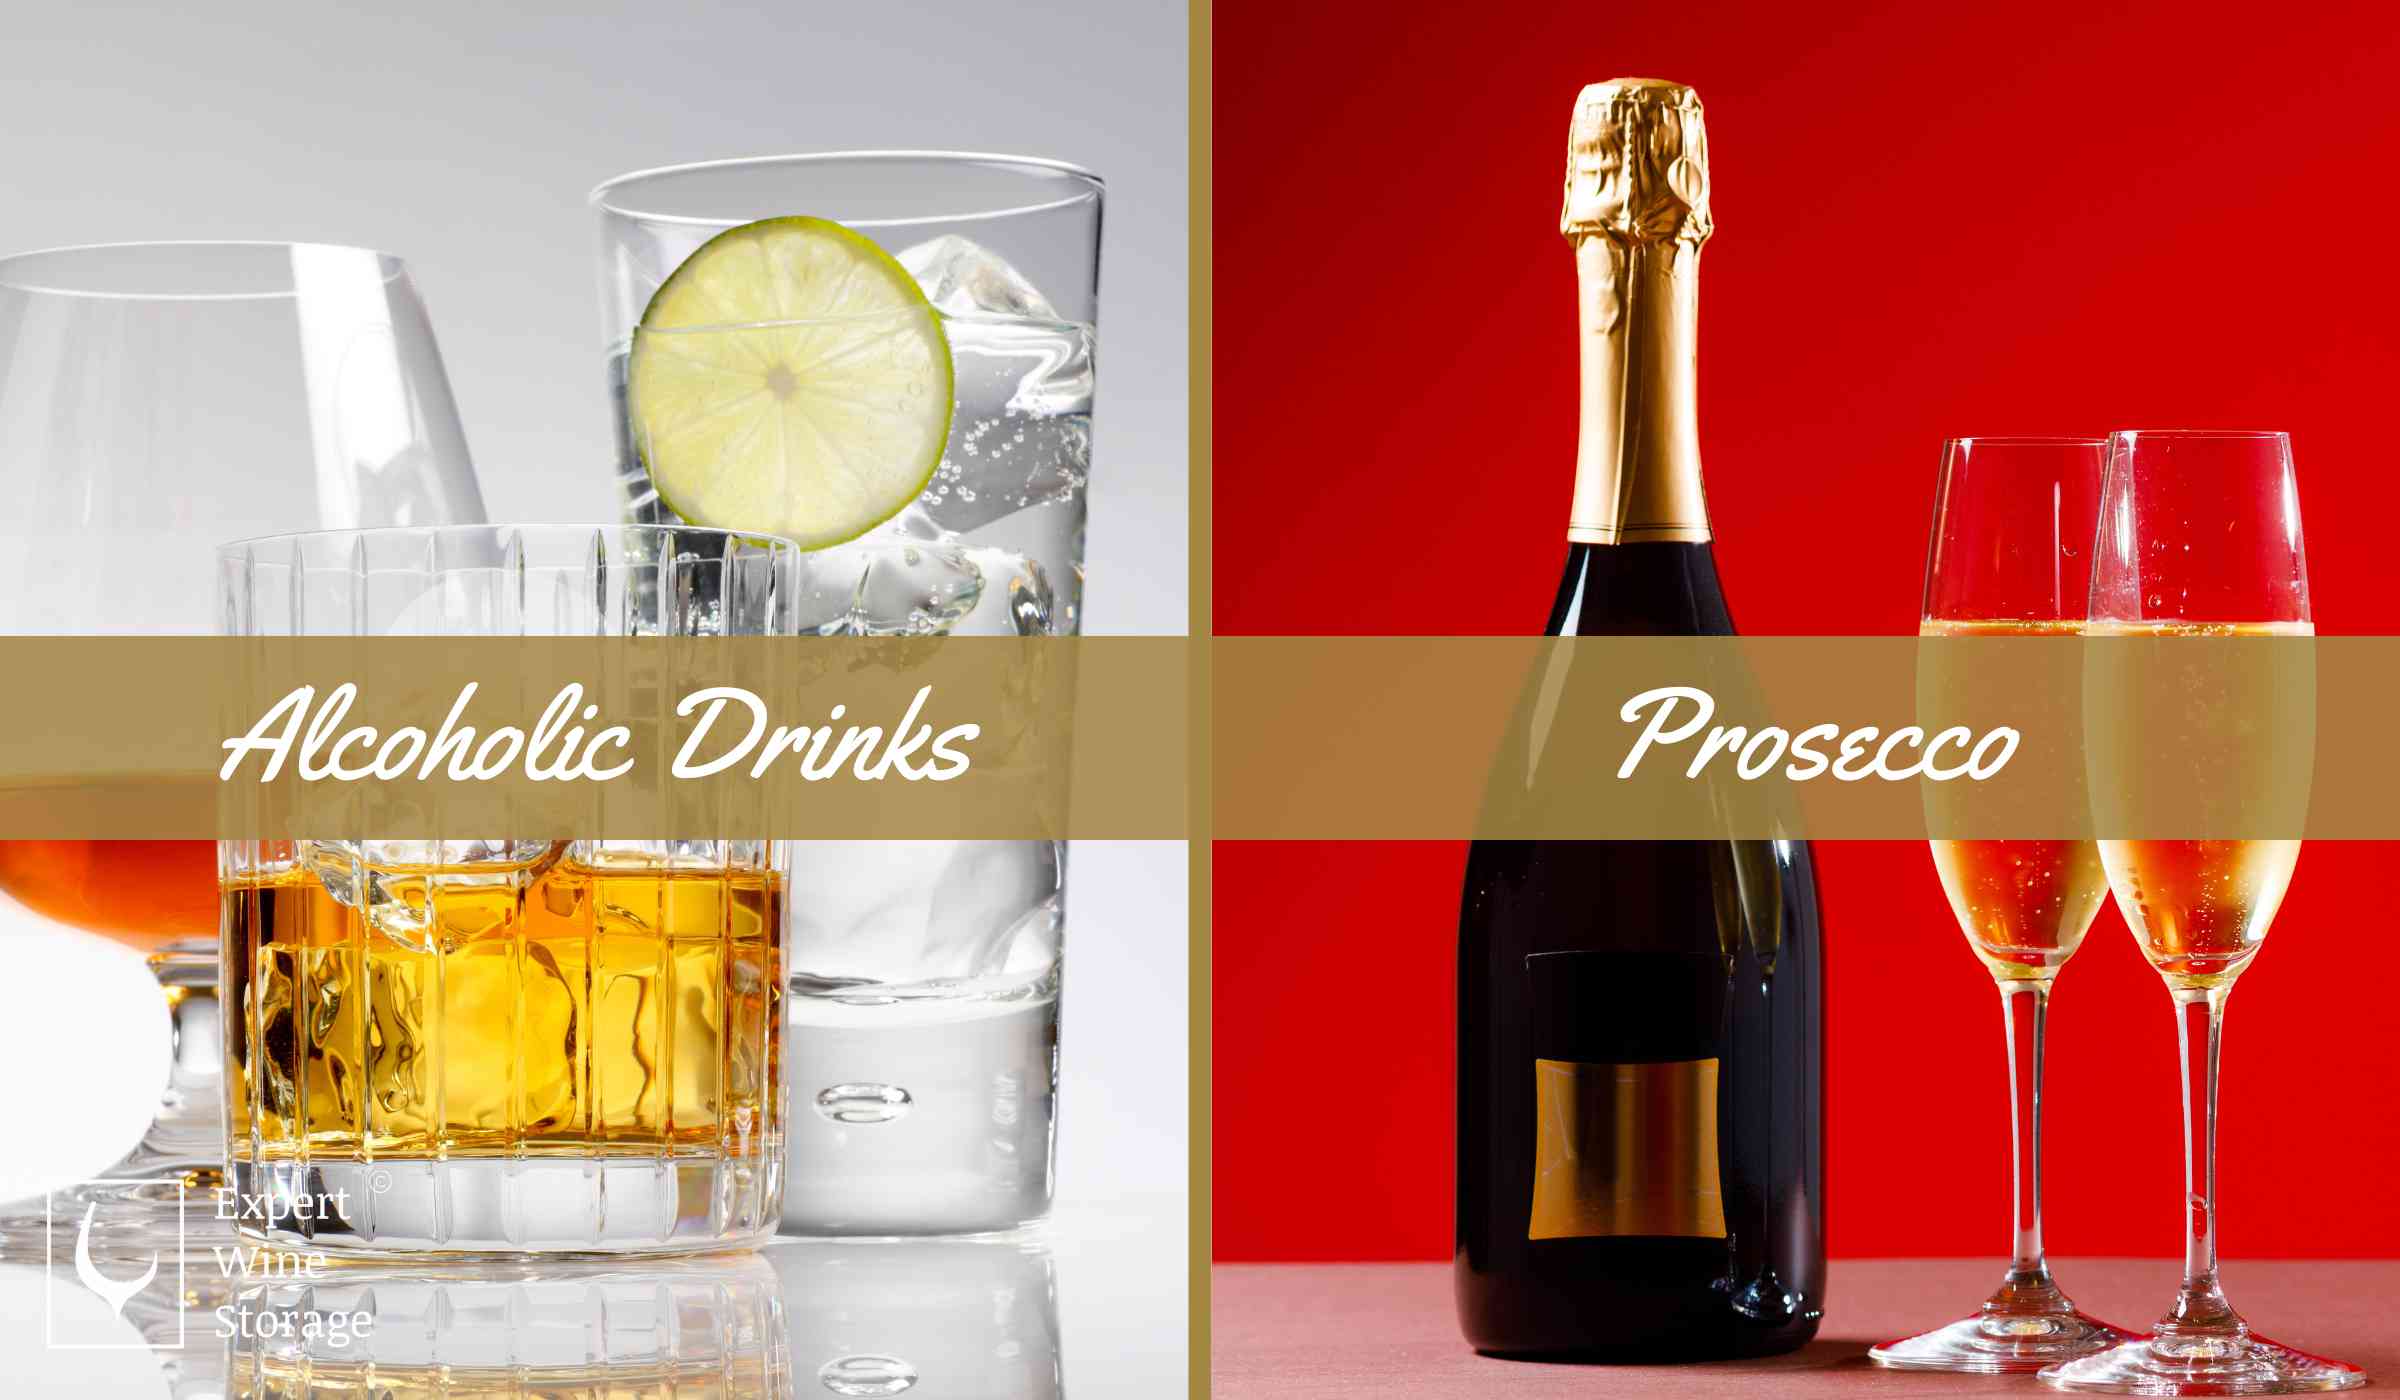 Prosecco Vs Other Drinks